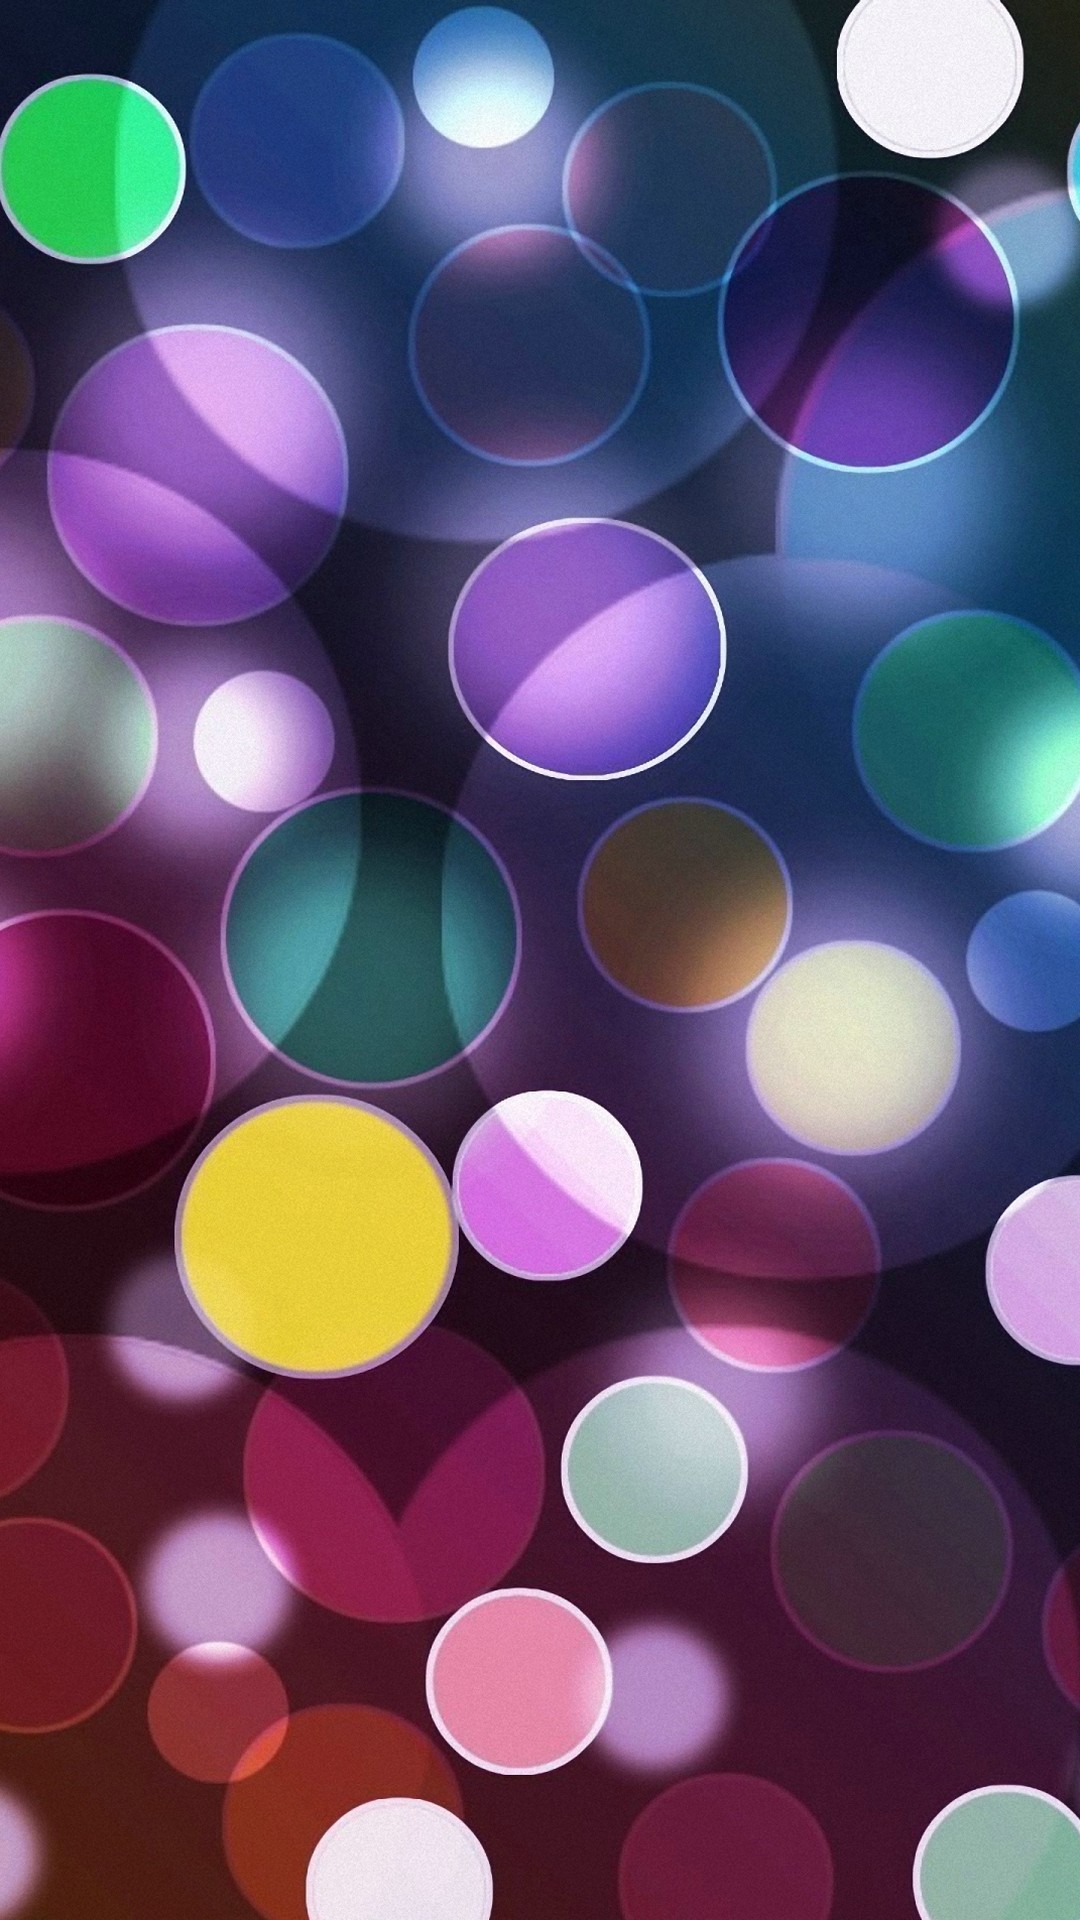 unique wallpapers for android,purple,violet,light,circle,pattern